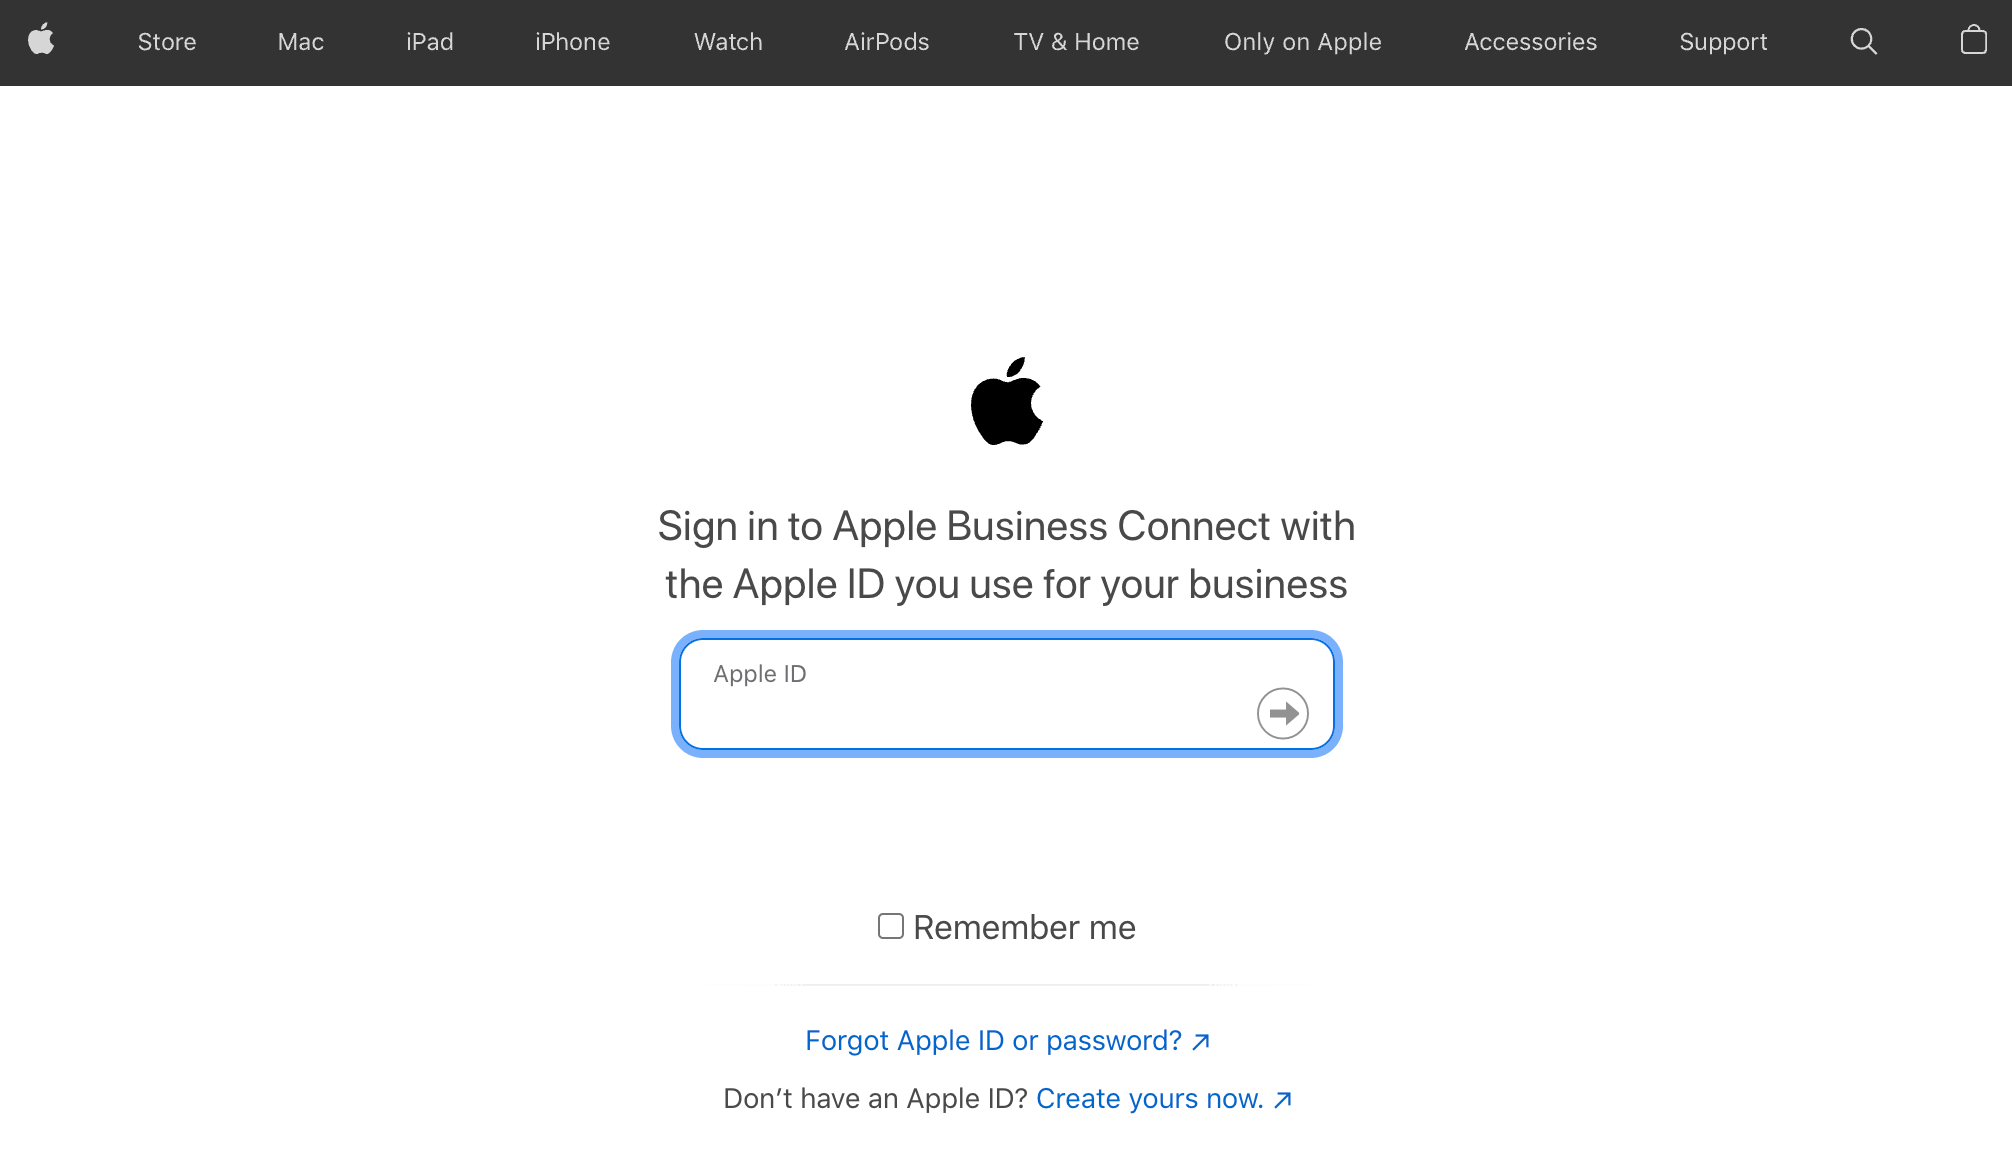 The page where you can sign in to Apple Business Connect with the Apple ID you use for your business.